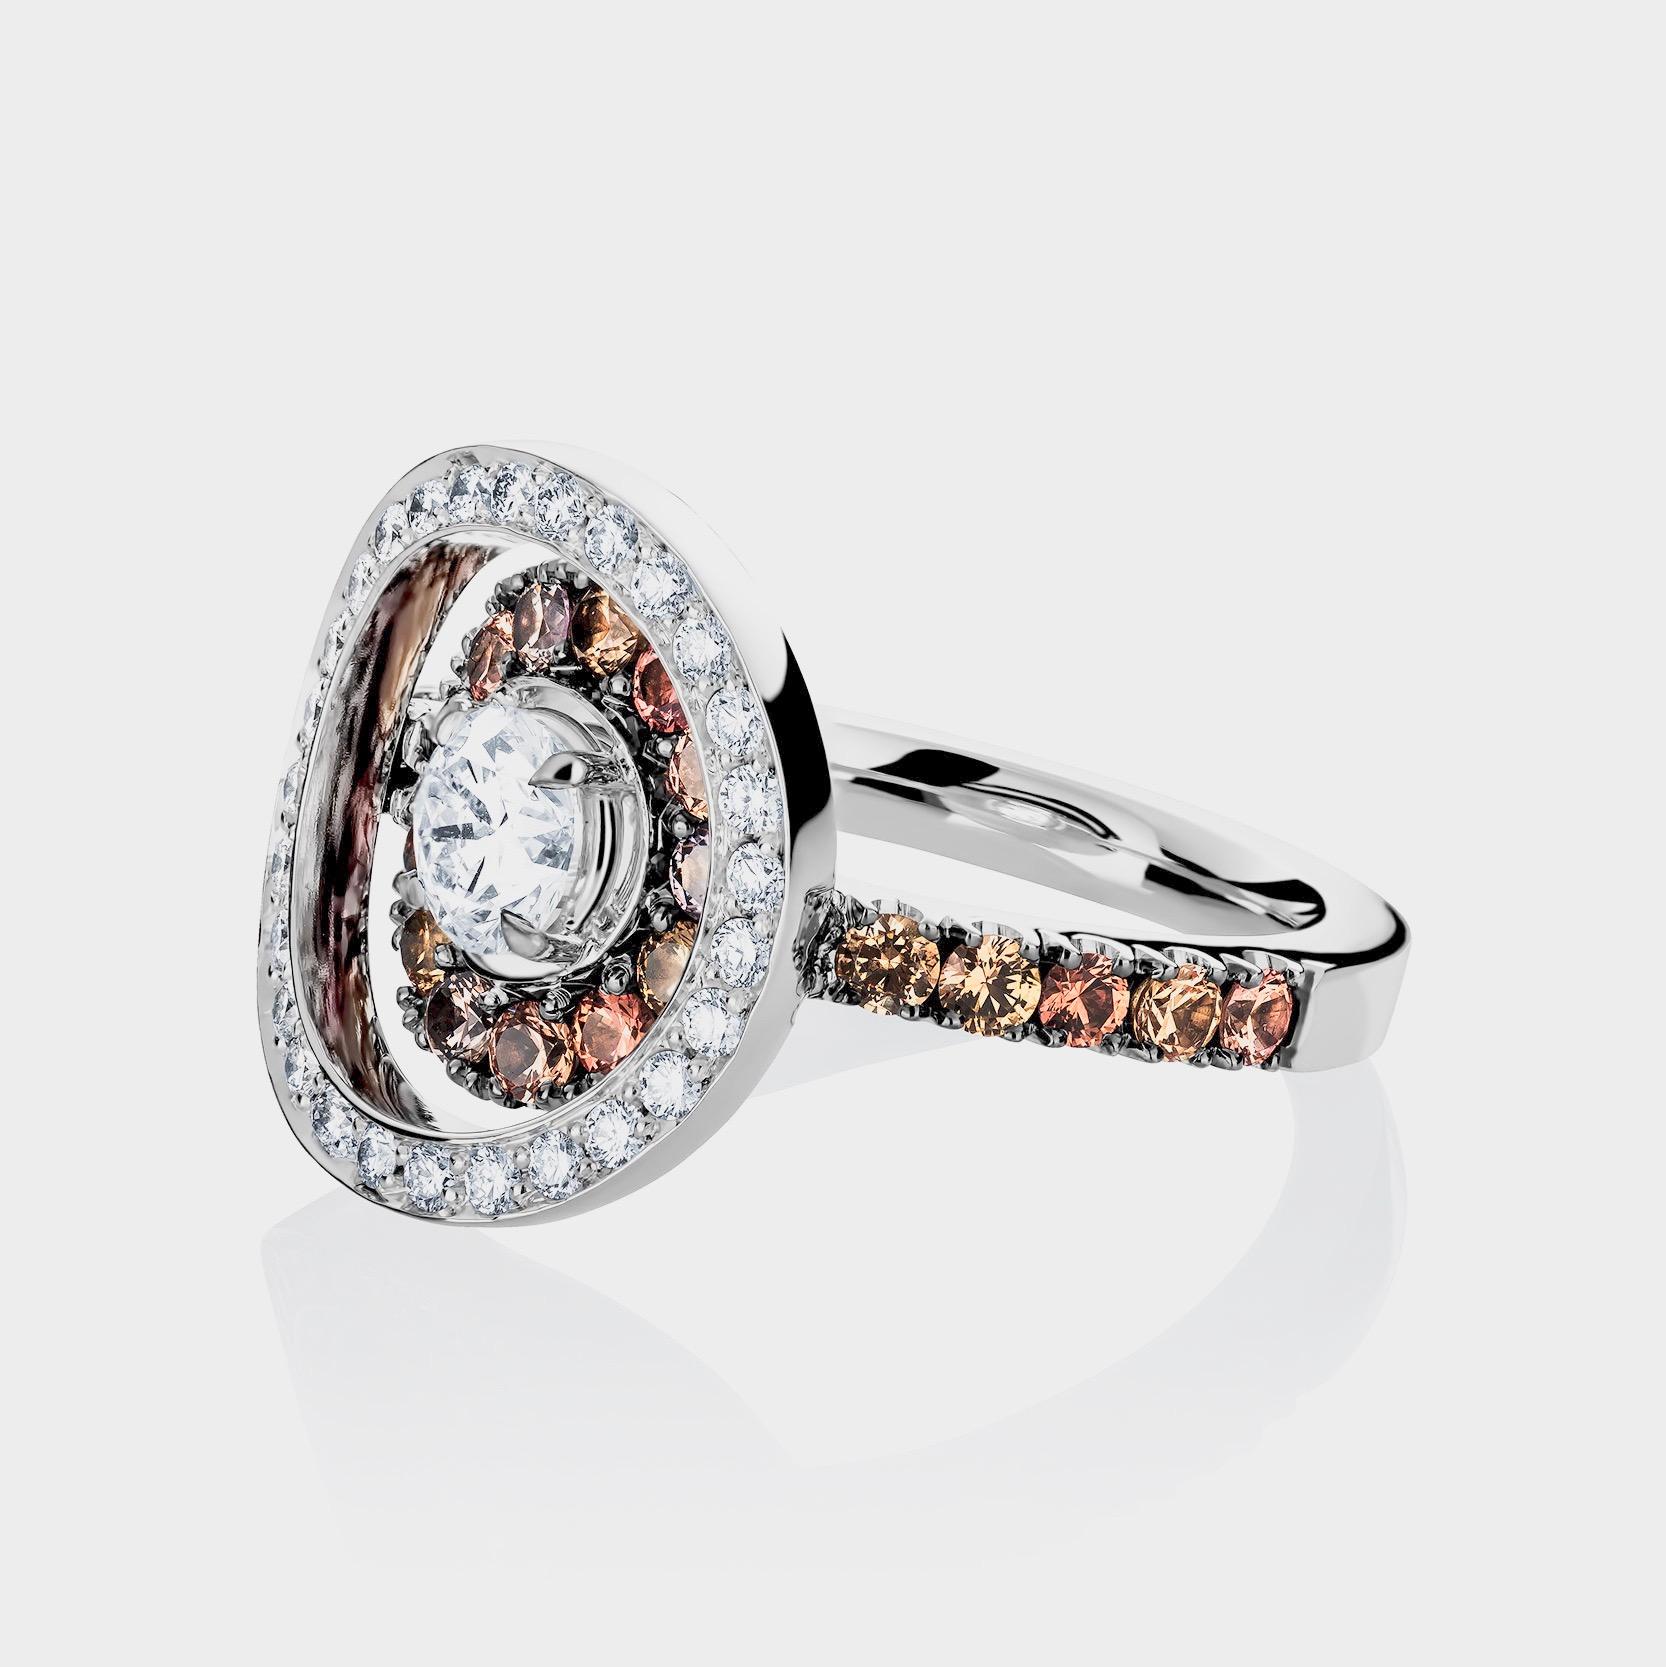 Ring in 18K White gold 7,3 g set with a white diamond brilliant-cut centerstone HVS 0,53 ct., white DEGVVS diamonds 0,738 ct., Skin Coloured Saphires 0,92 ct. . Handmade the traditional way. size EU 54,5, US 6,75. This exquisite product comes from